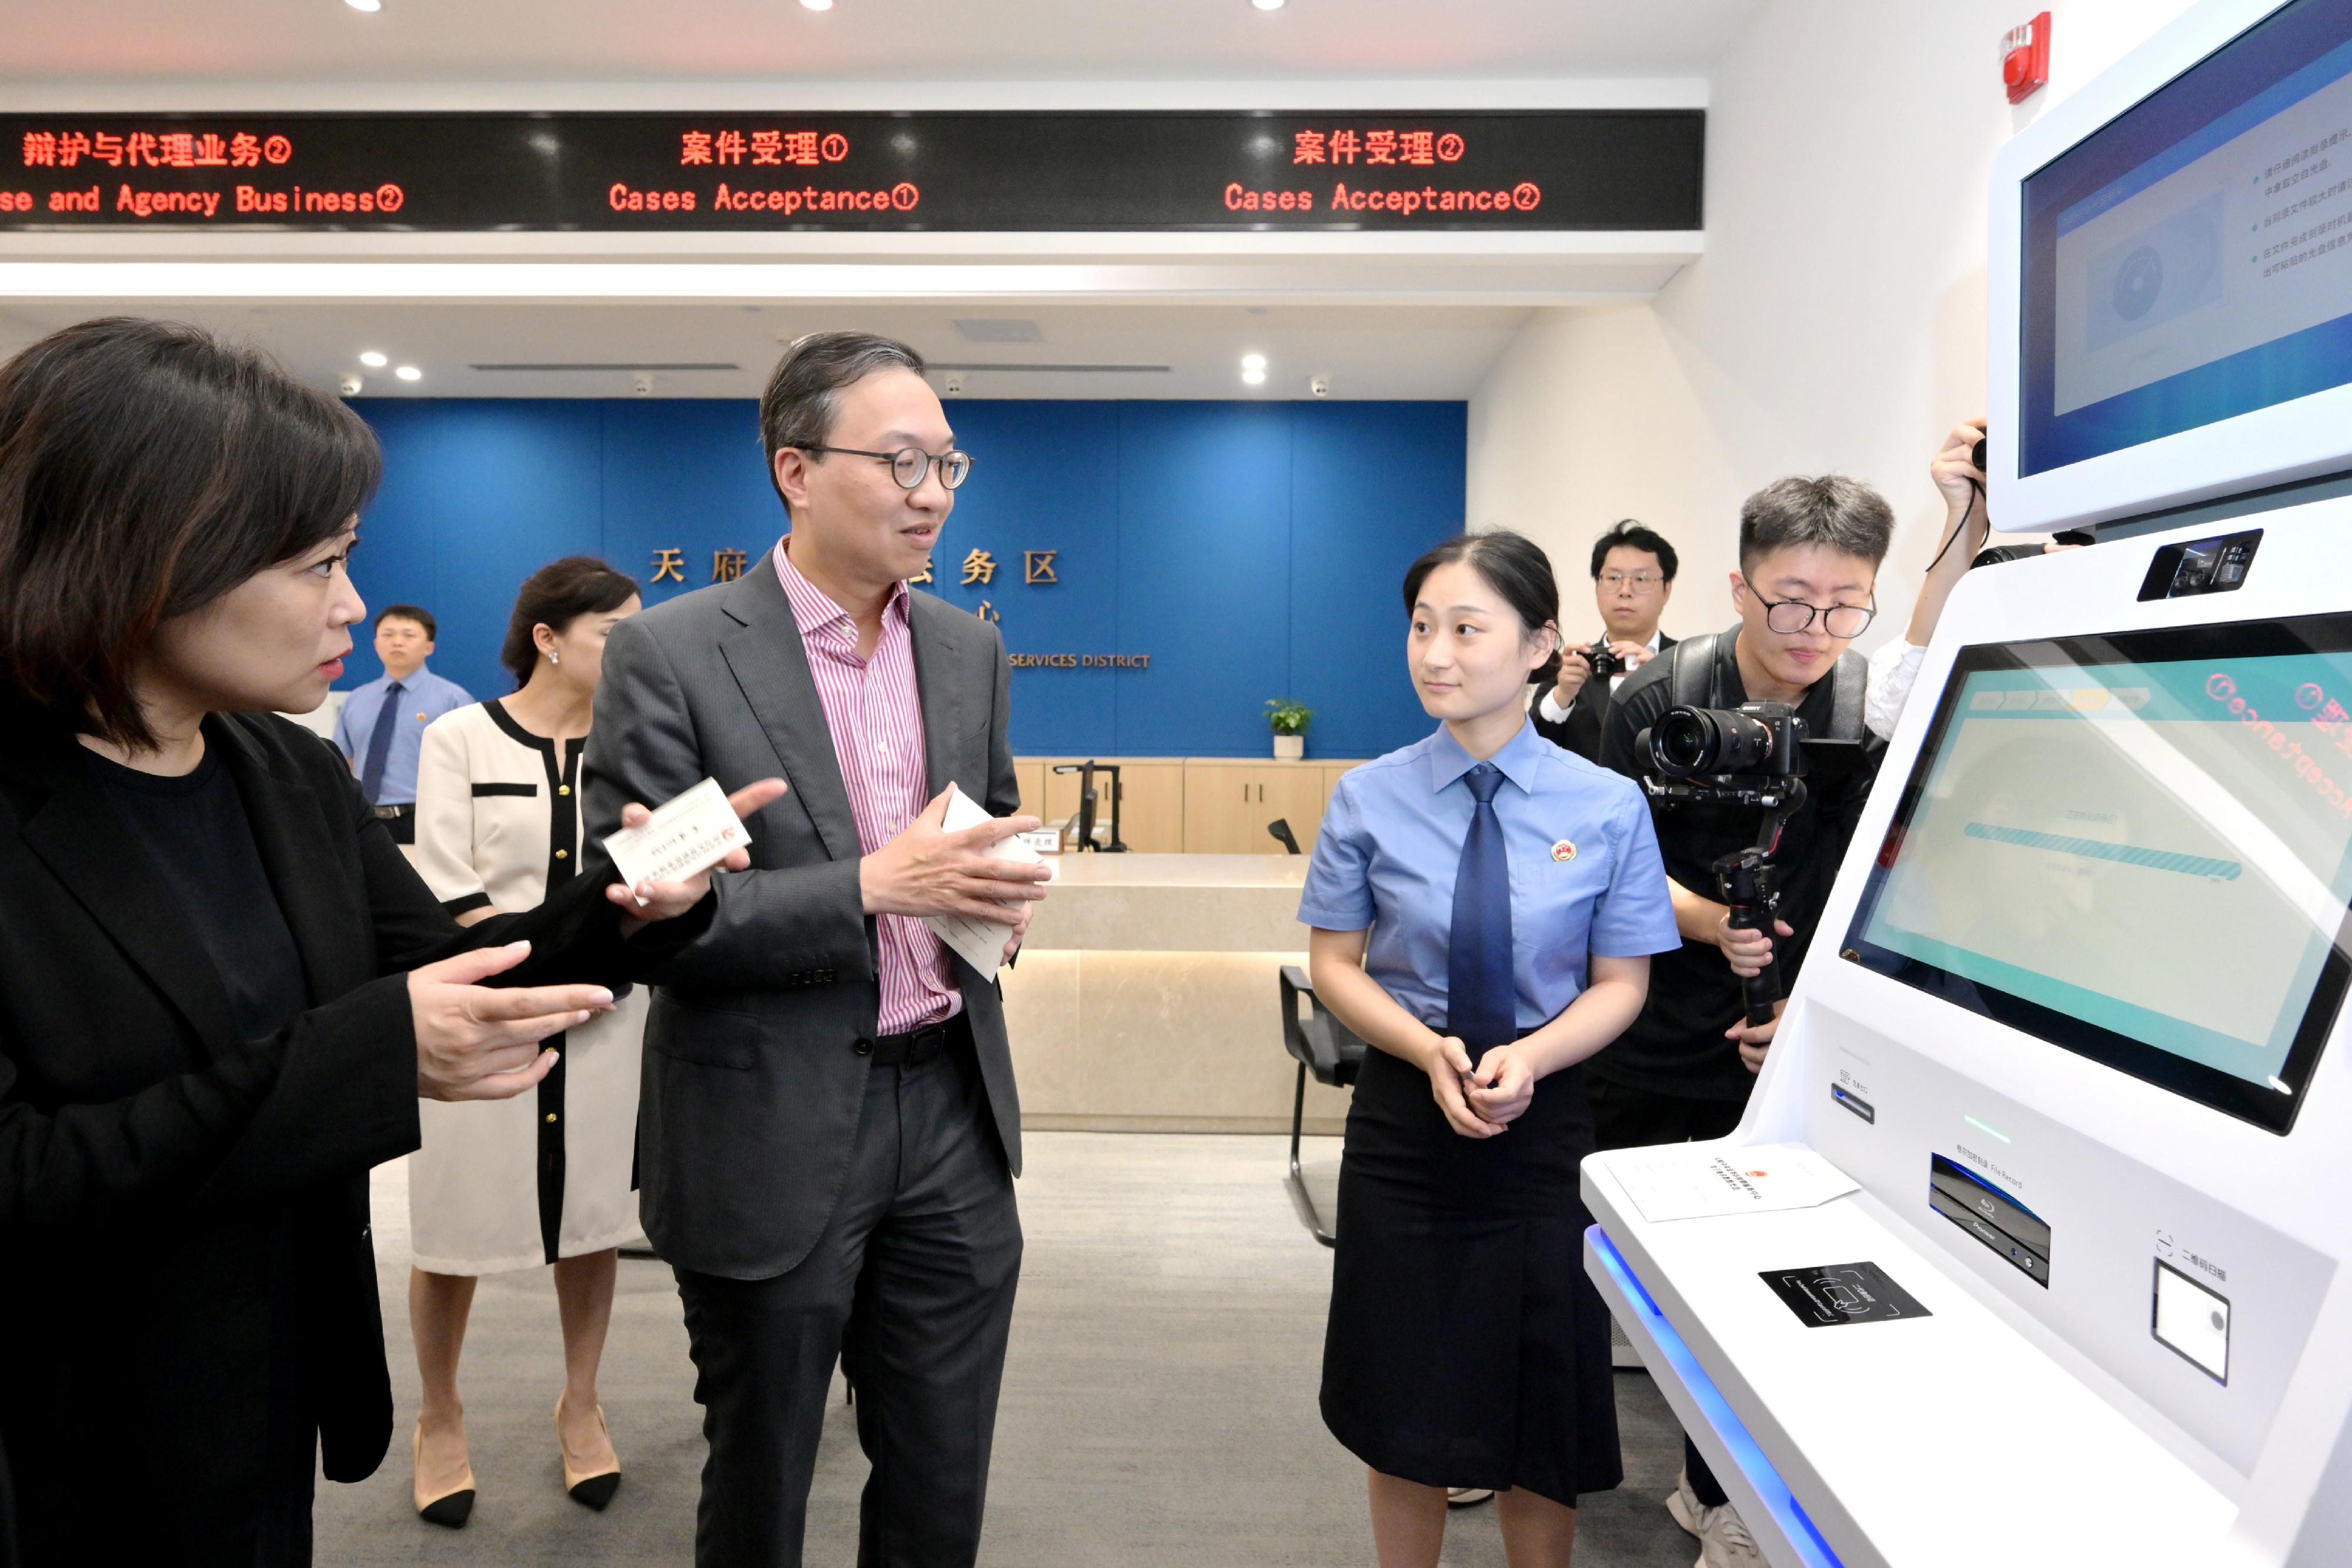 The Secretary for Justice, Mr Paul Lam, SC, led a delegation from Hong Kong's legal and dispute resolution sector to visit Tianfu Central Legal Services District in Chengdu on August 23. Photo shows Mr Lam (centre) being briefed on Tianfu Central Legal Services District.

